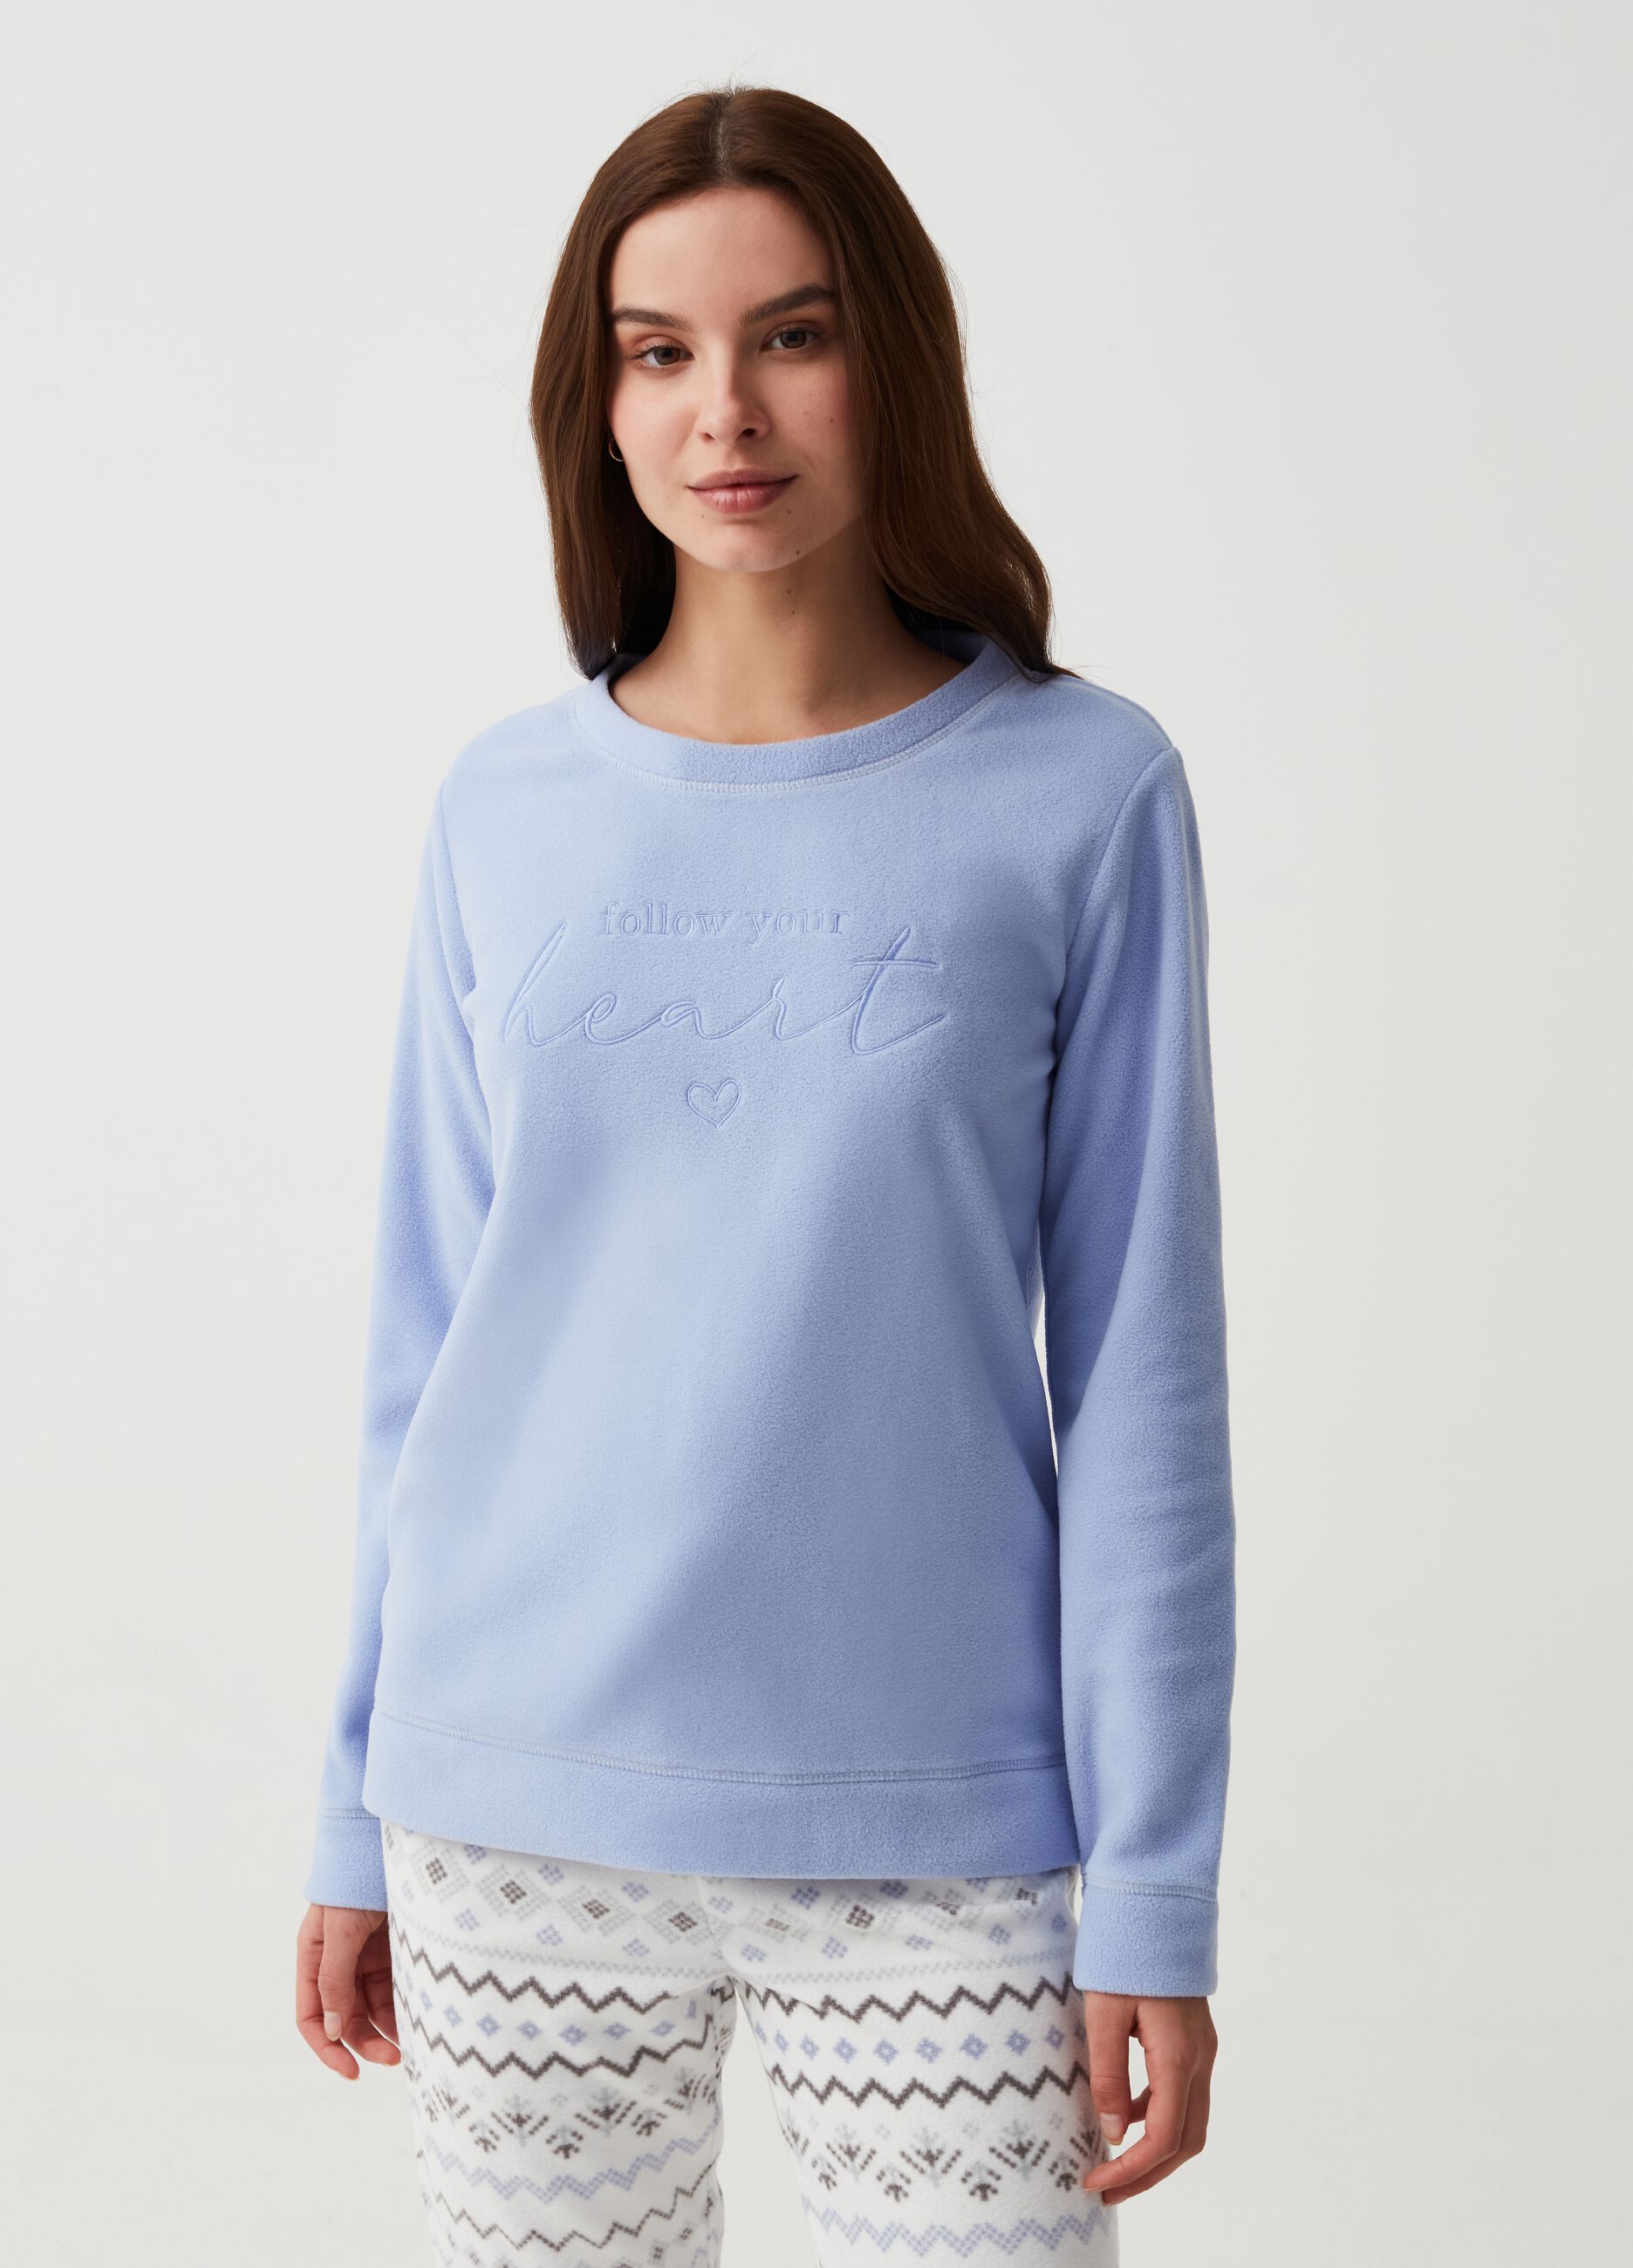 Fleece pyjama top with lettering and heart embroidery